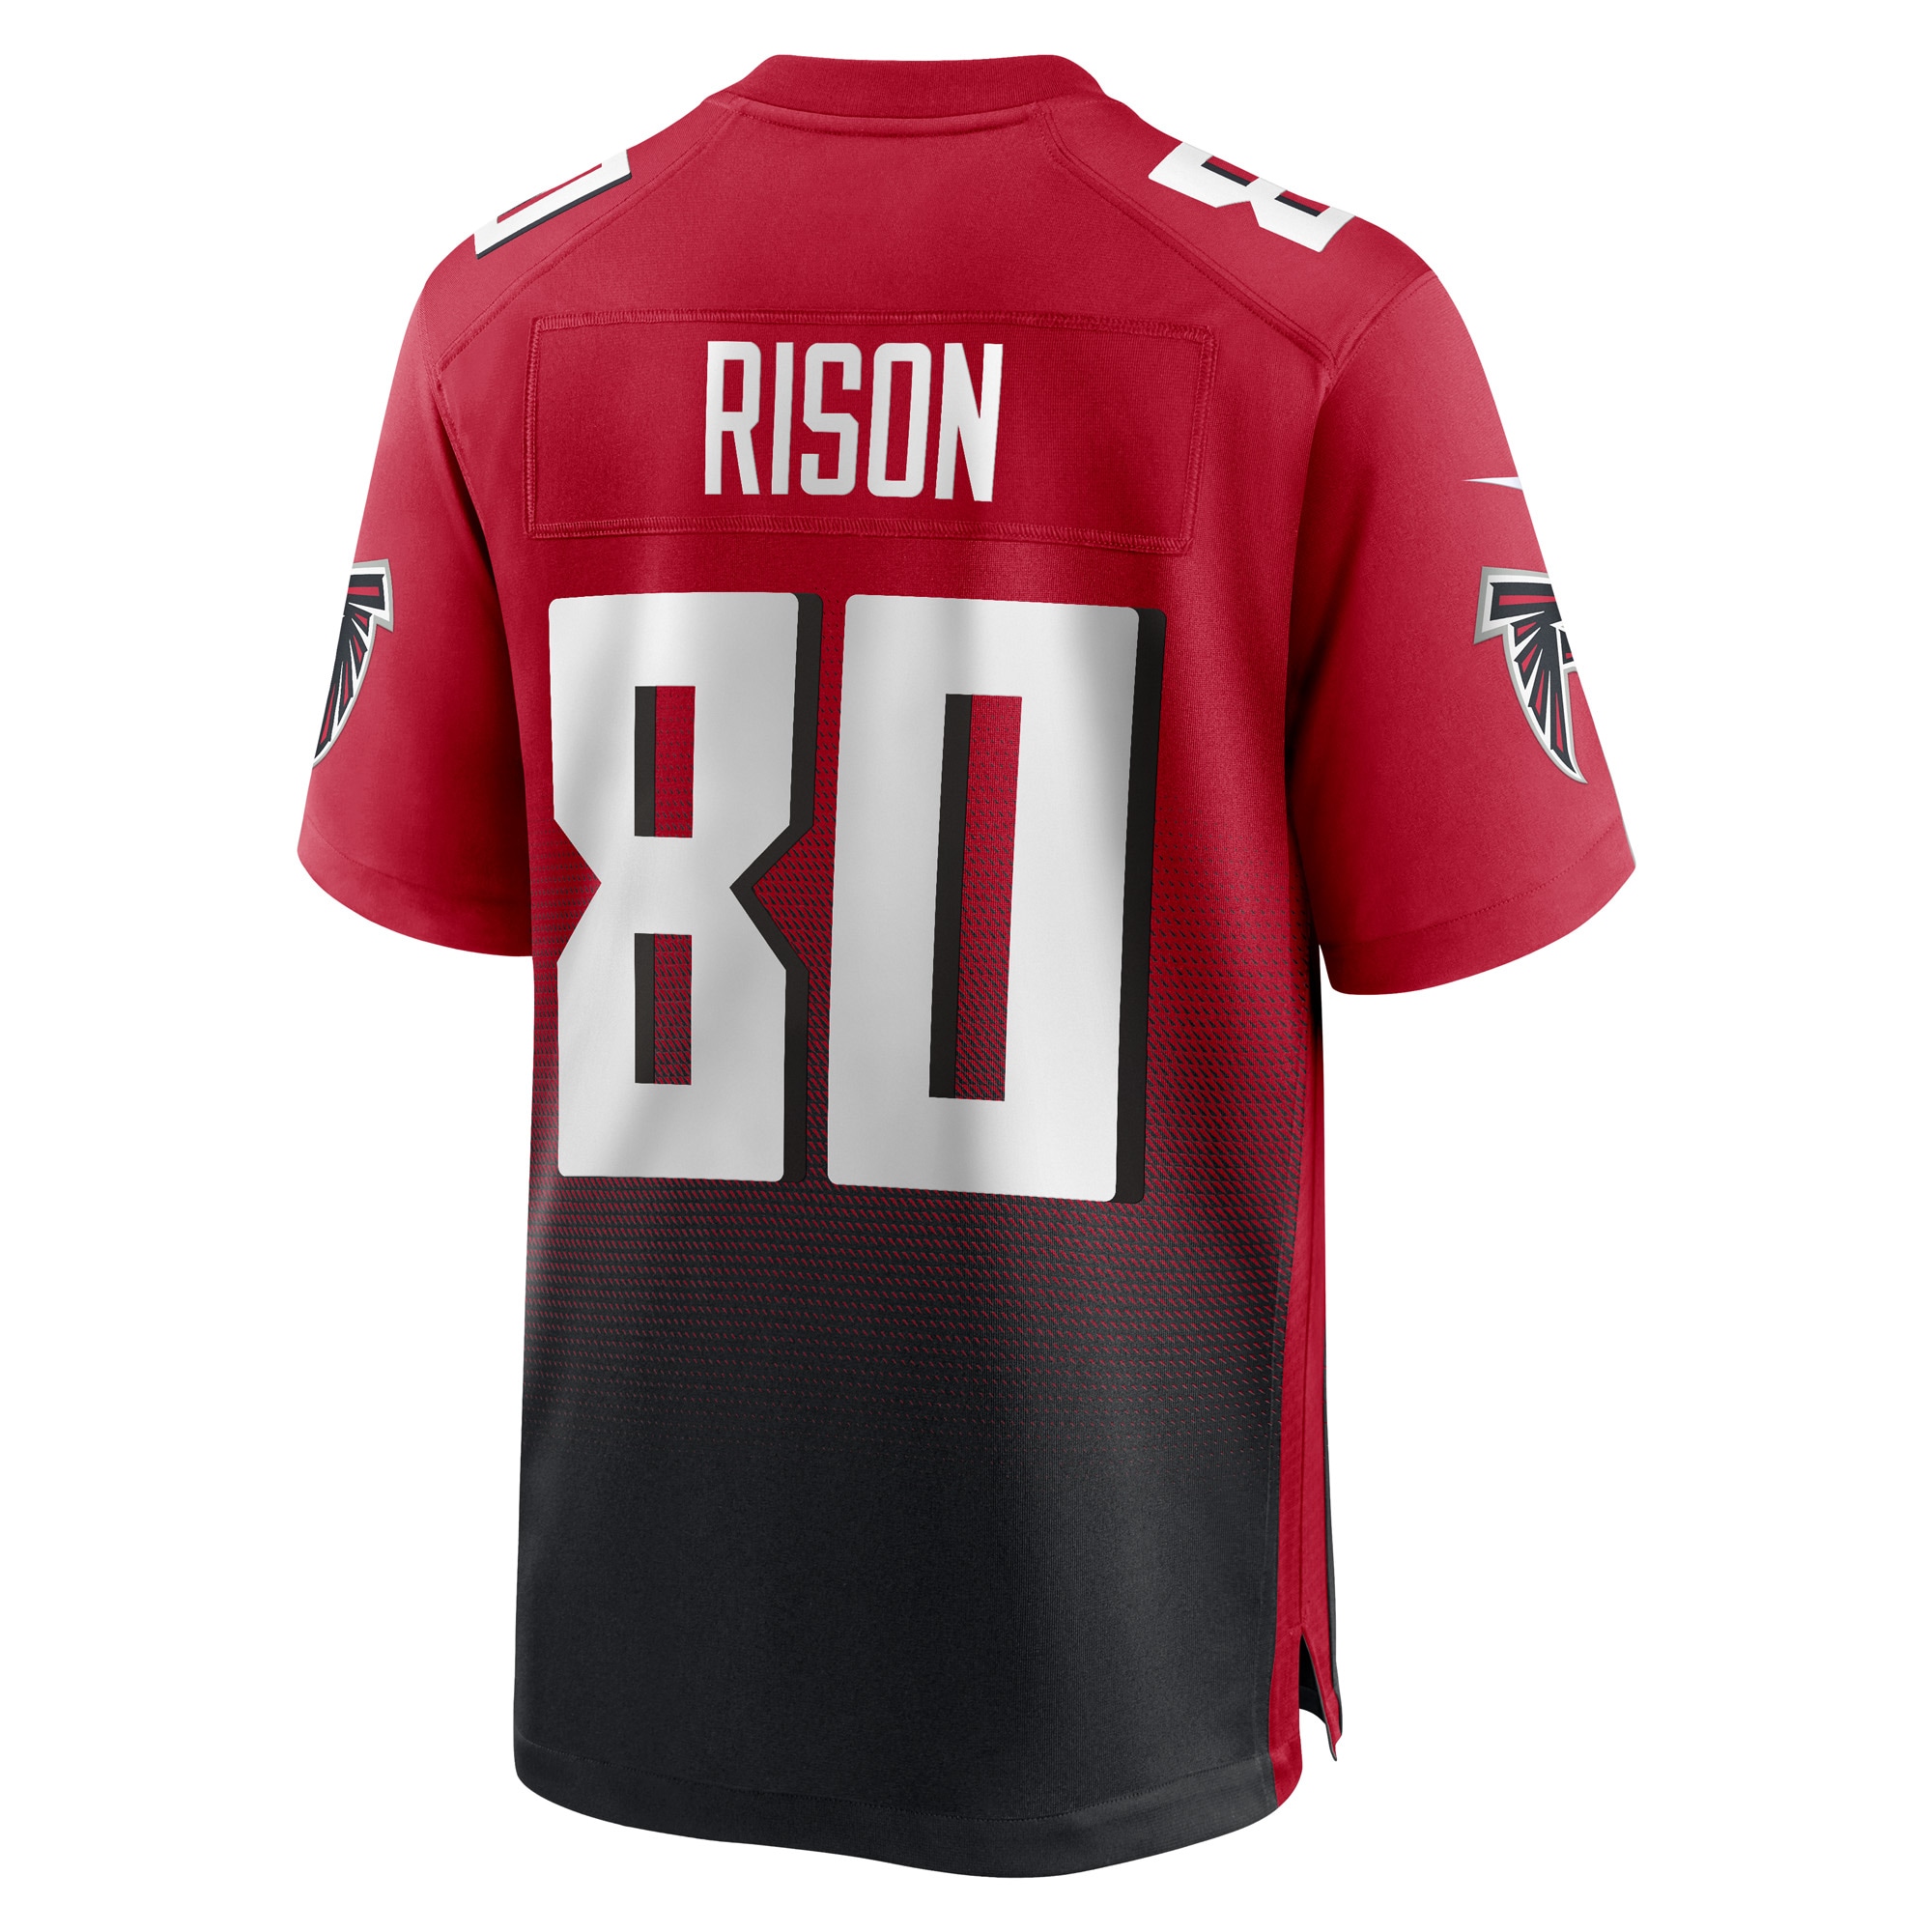 Men's Atlanta Falcons Jerseys Red Andre Rison Retired Player Style